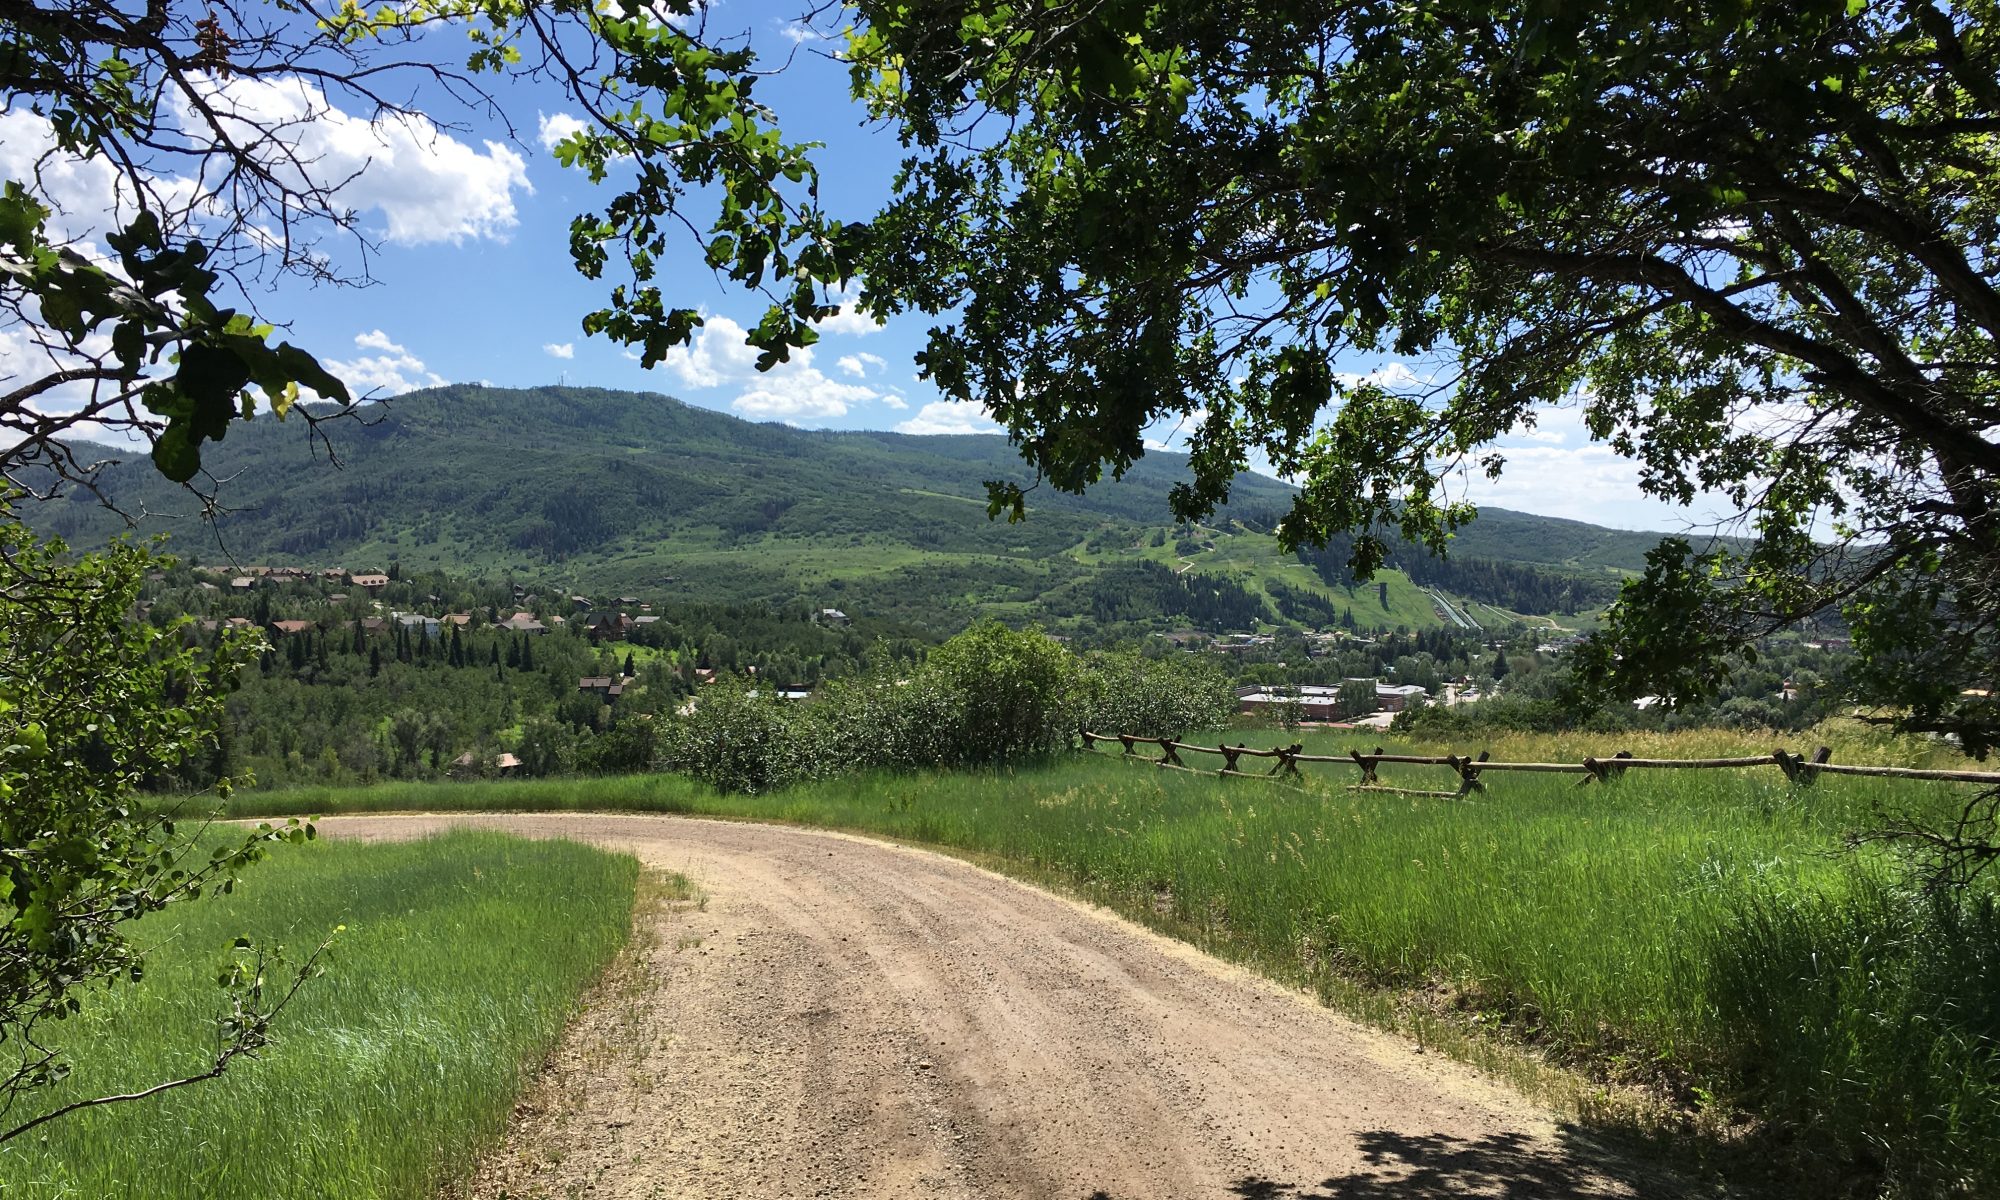 A tree lined lane with mountain views sold in 2020 - A memorable year for real estate!